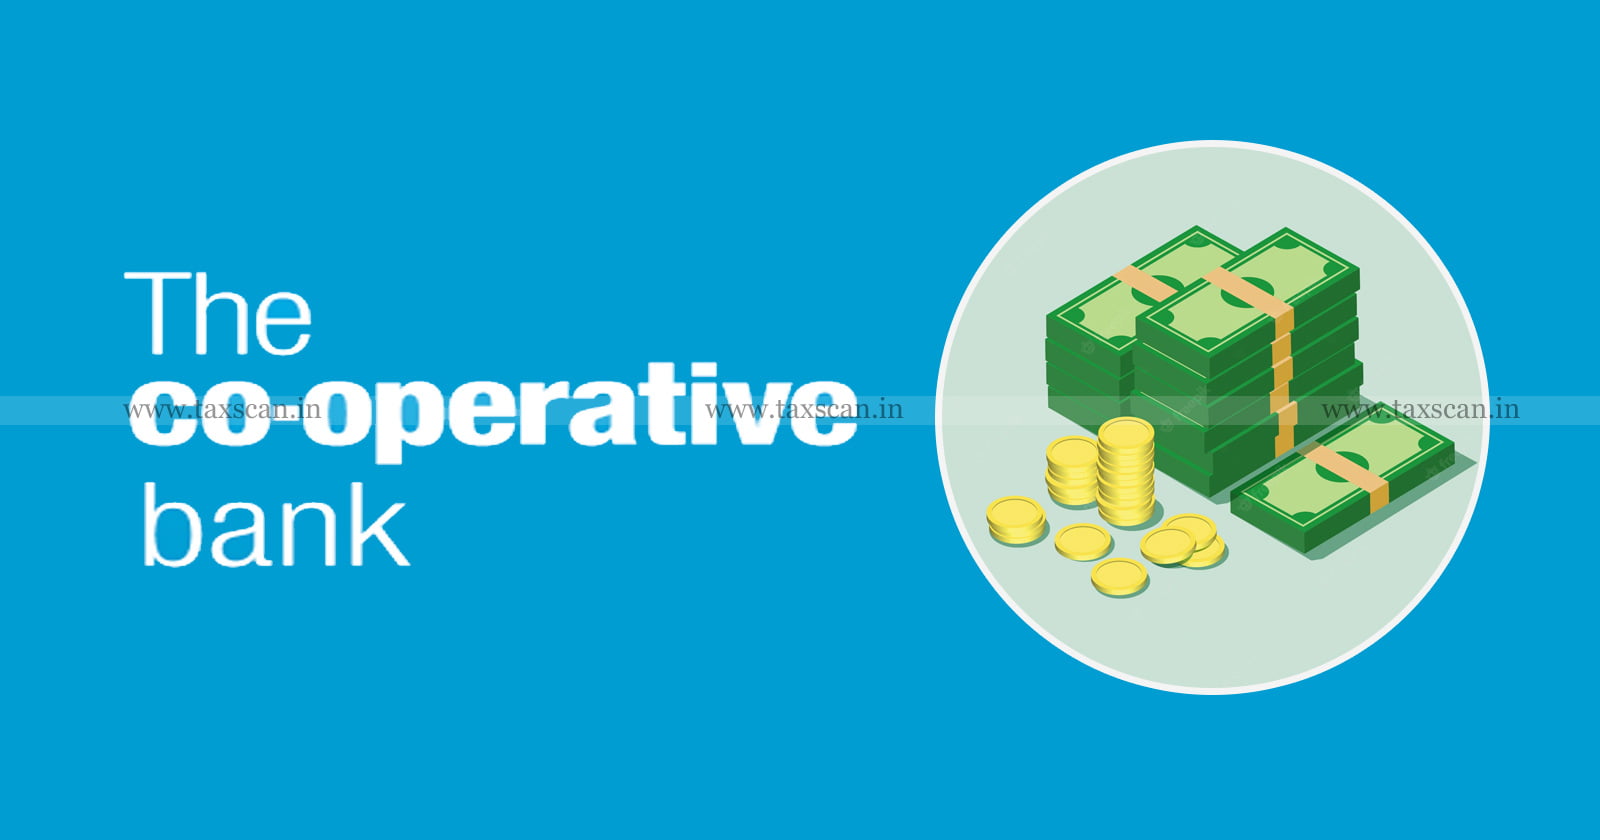 Co-Operative Society - Claim Deduction of Interest - Deduction - Deduction of Interest - Deposits - Co-Operative Banks - ITAT - Income Tax - Taxscan